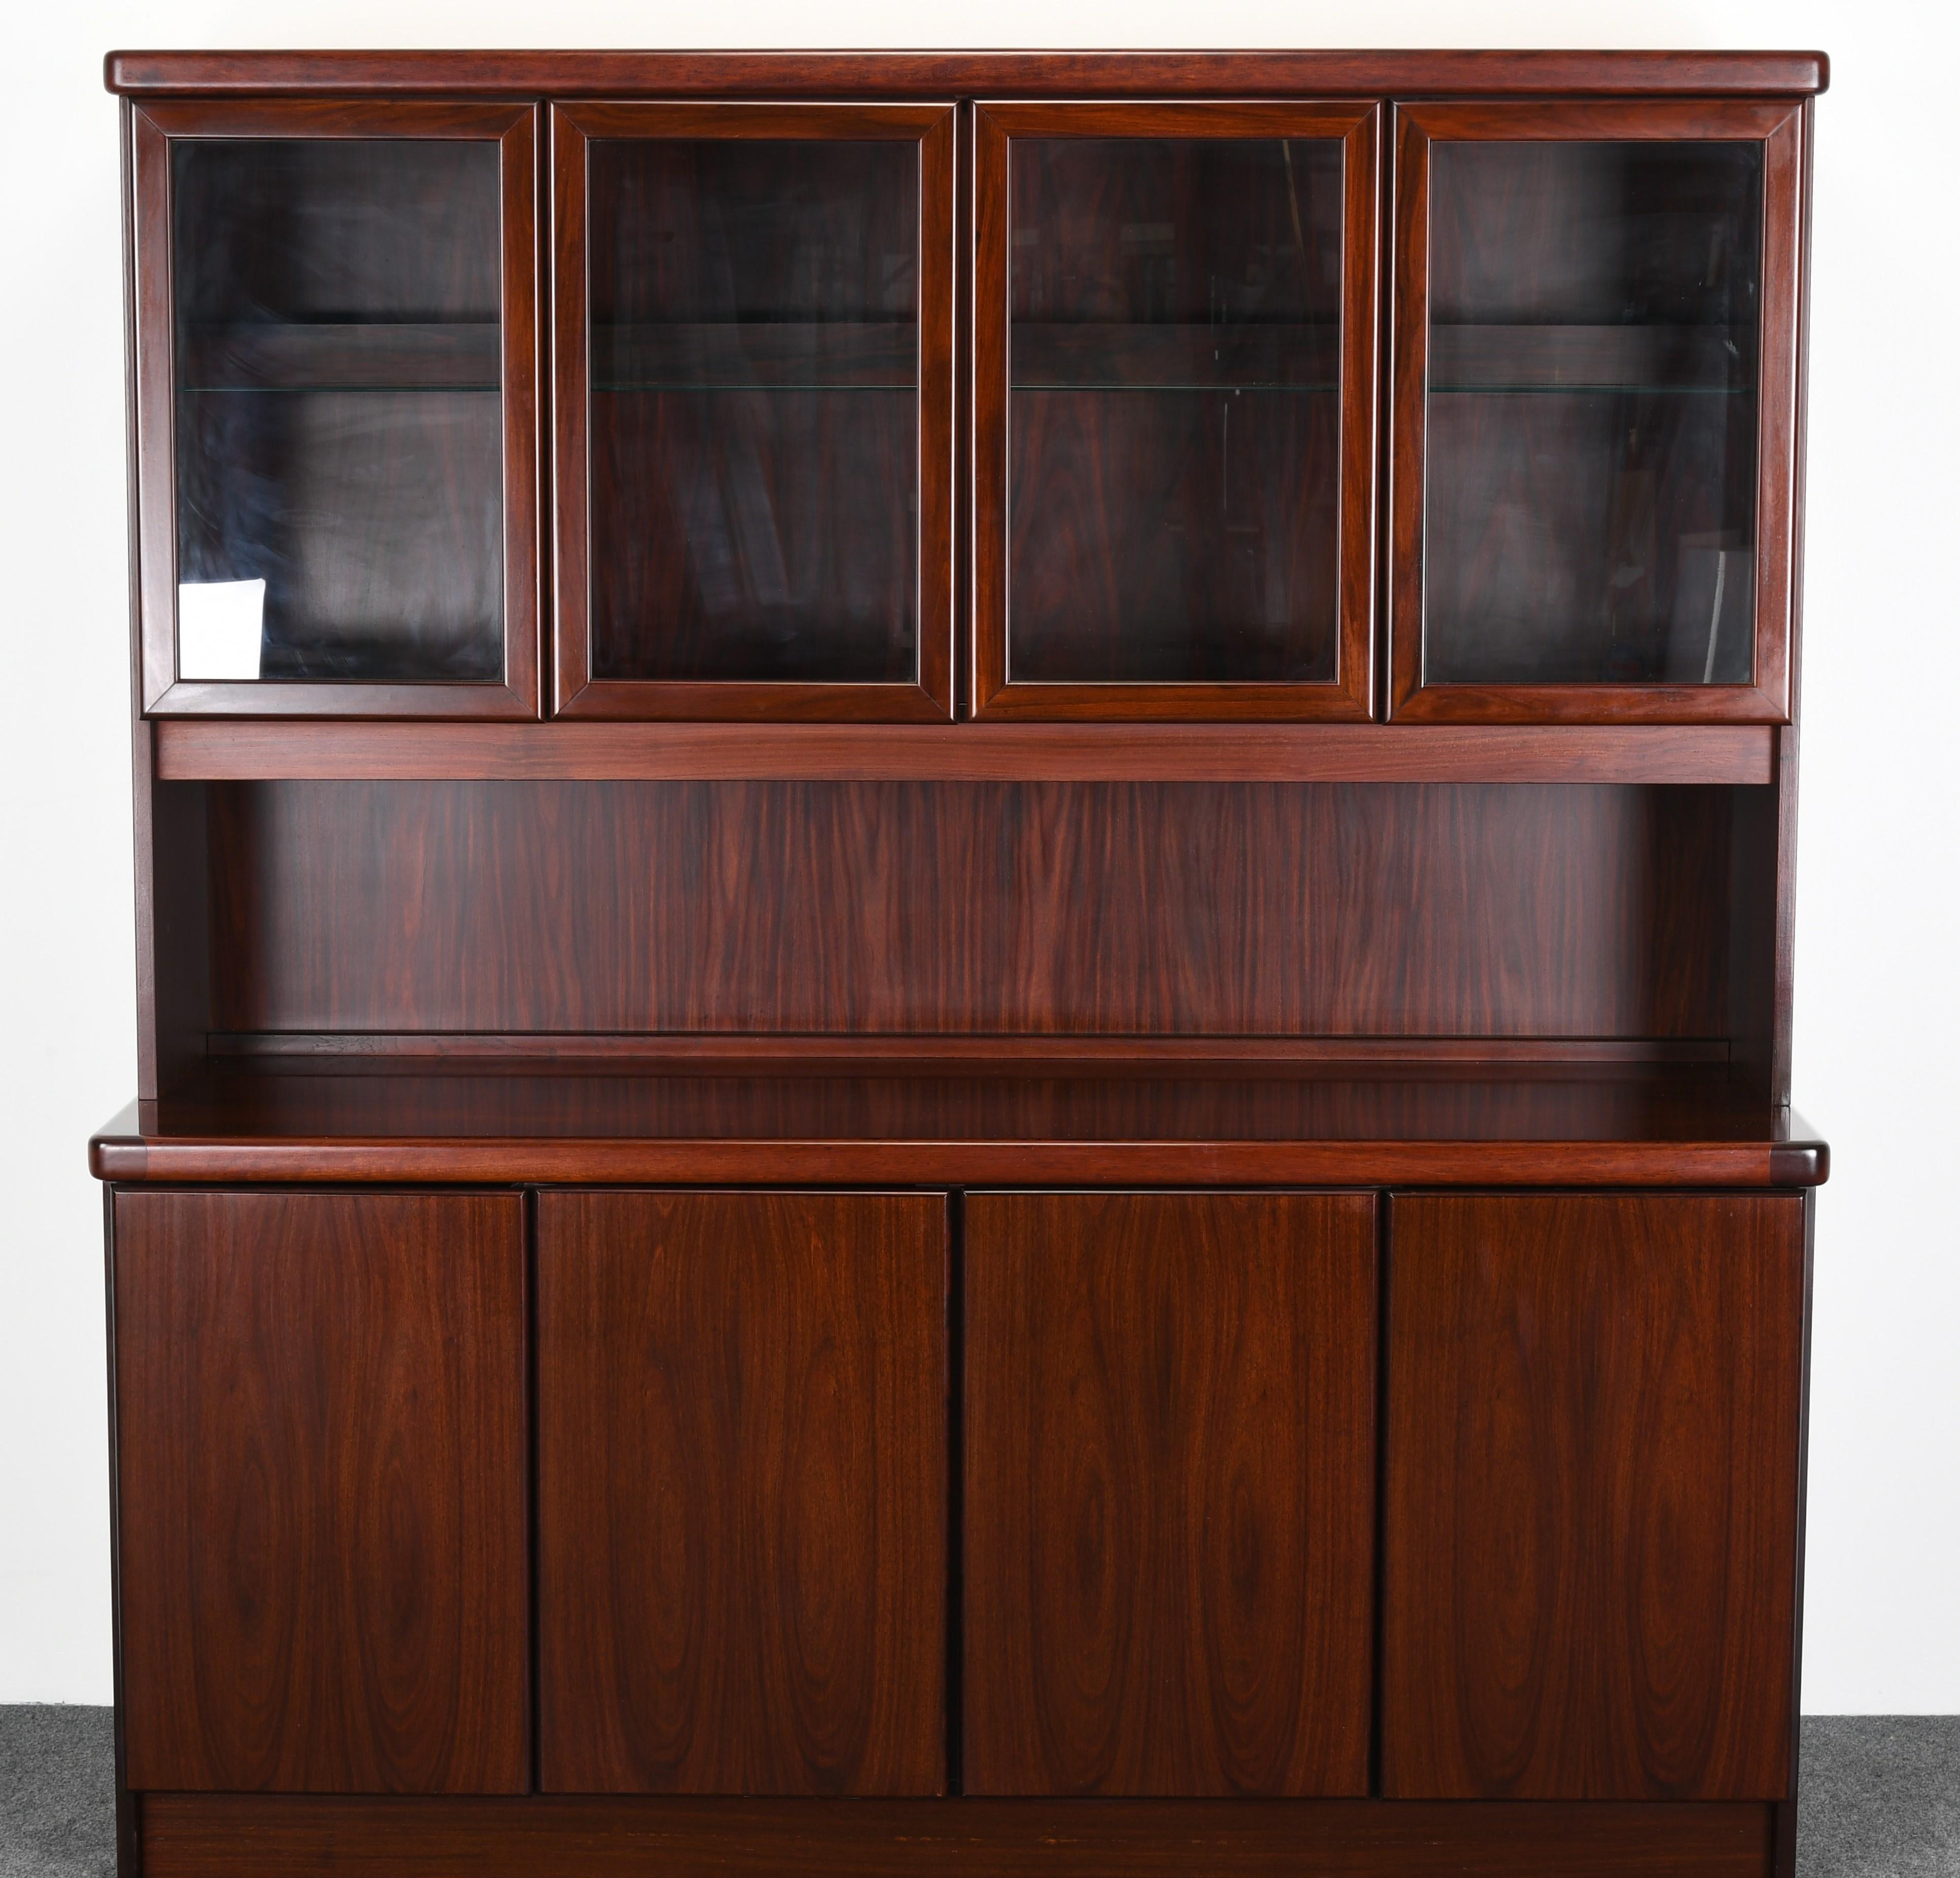 A gorgeous rosewood Danish buffet labeled Chr. Linneberg with glass front cabinets with interior and down lighting. The base has 4 doors, 4 shelves and 2 drawers for ample storage. The top has four doors and one interior glass shelf. The breakfront